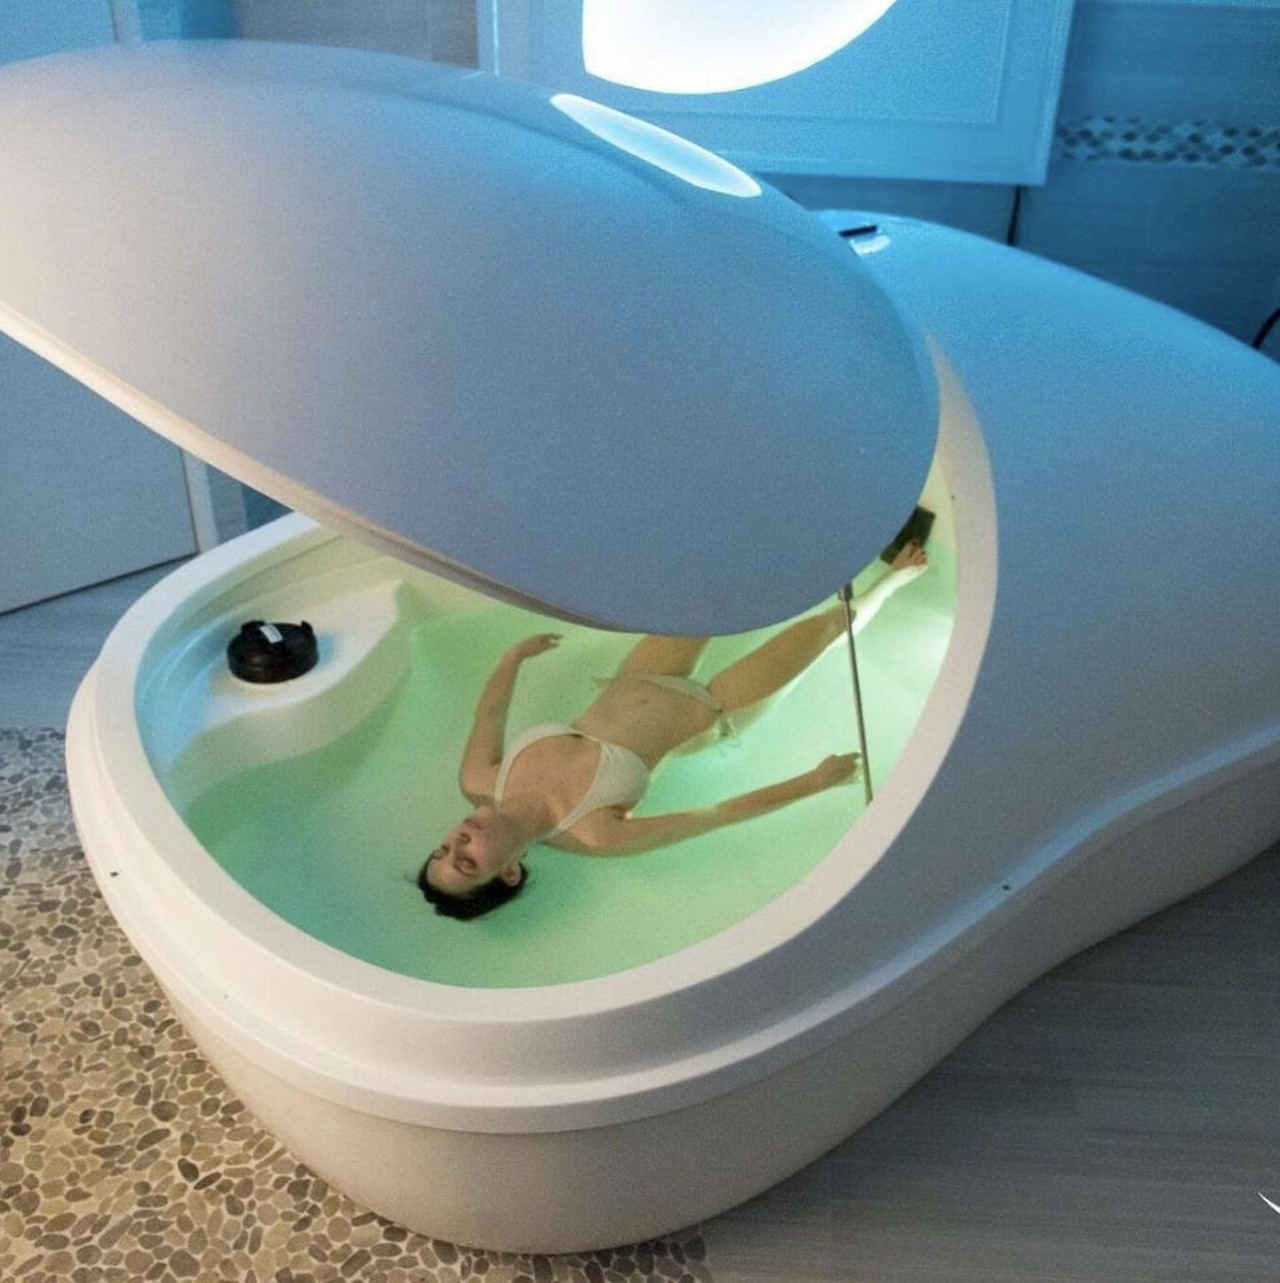  Float in Salt Water
True Rest Float Spa, 21643 Center Ridge Rd., Rocky River
Relatively new to Cleveland, this trend has been popular in countrywide for the last ten years or so. These floating spas are a great way to just kick back and relax.
Photo via @TrueRestCleveland/Instagram